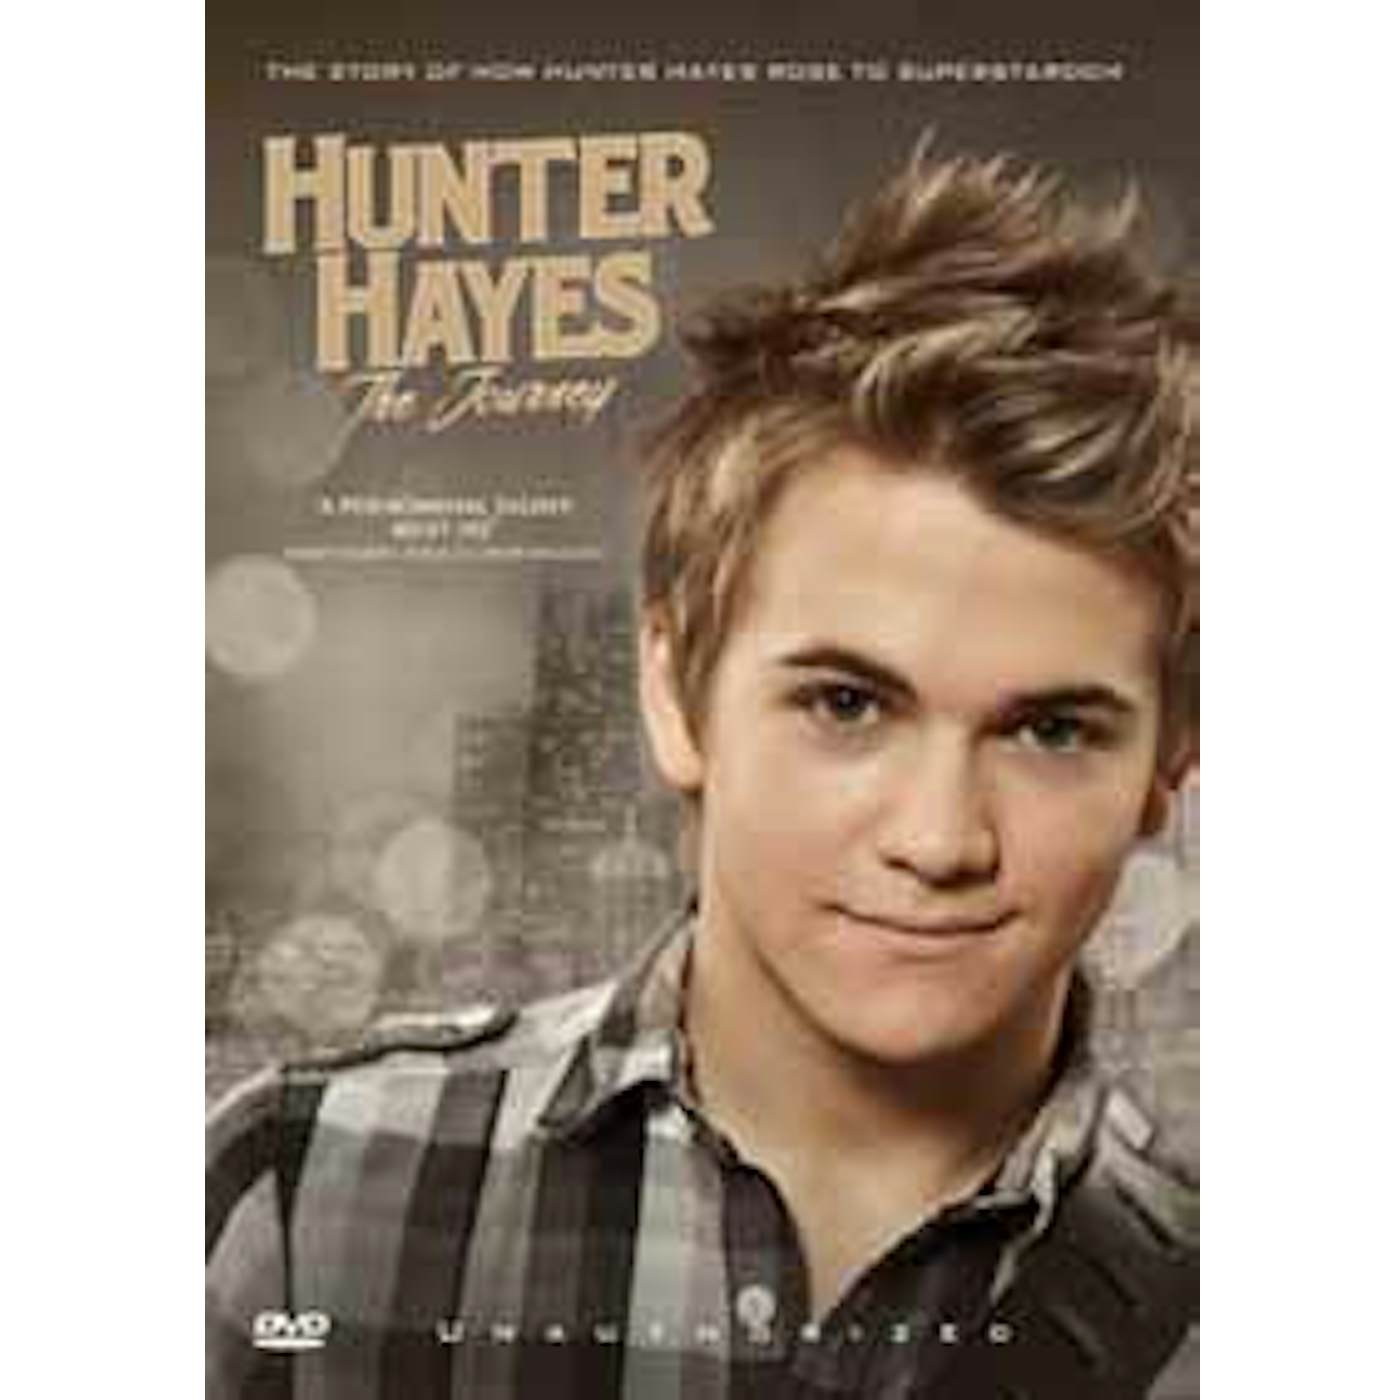 Hunter Hayes DVD - The Journey